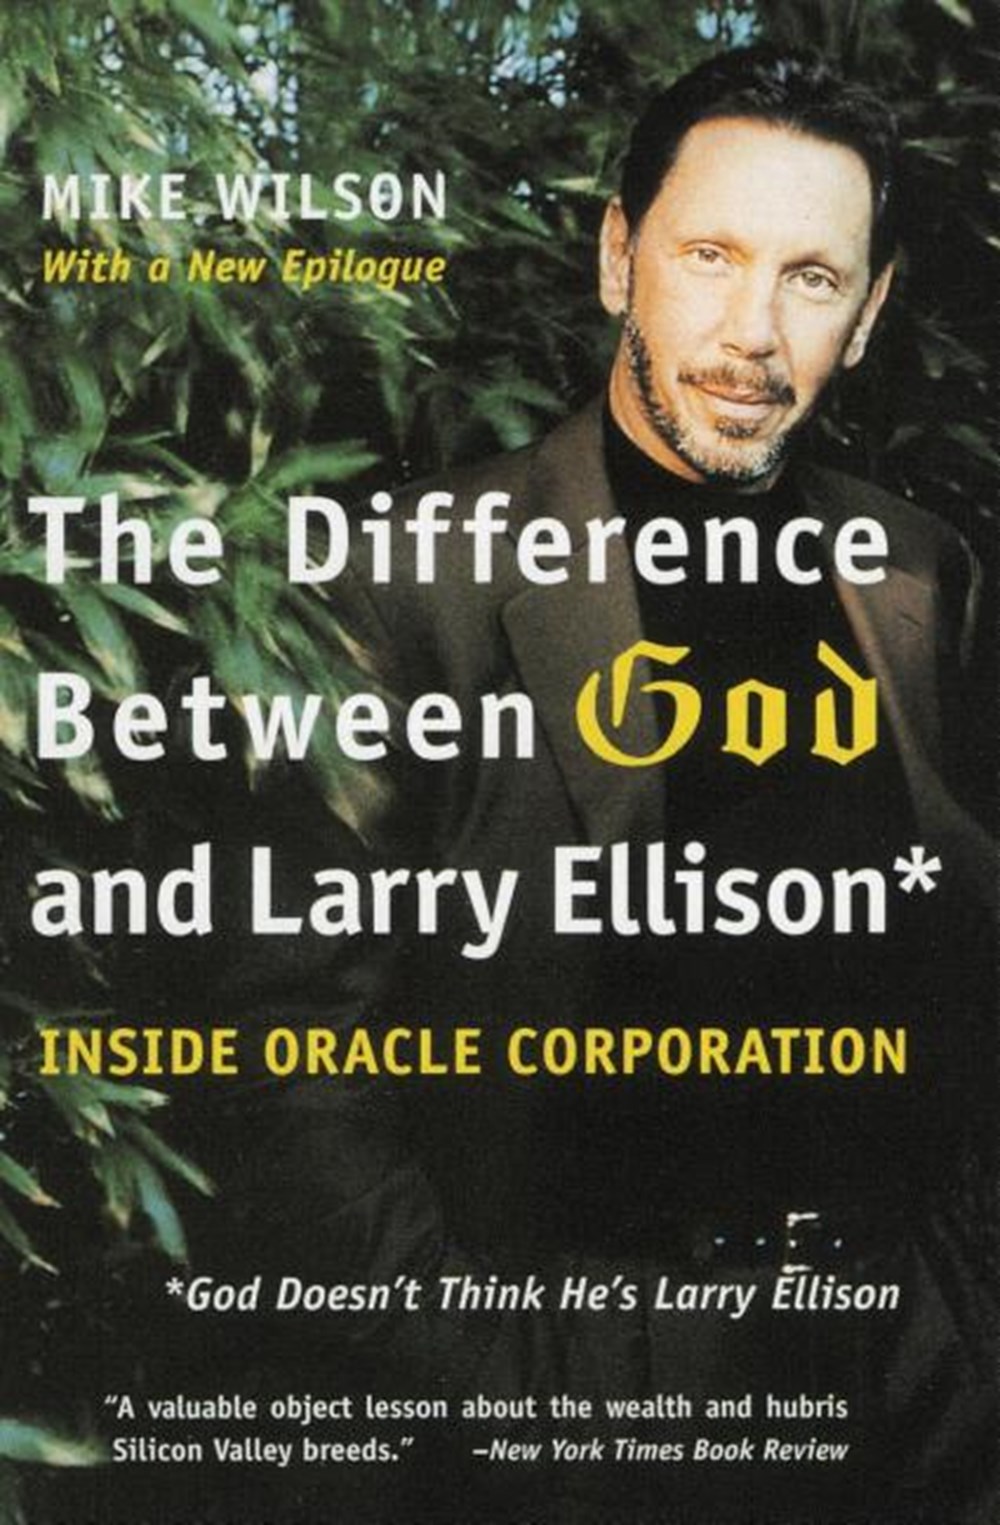 Difference Between God and Larry Ellison *God Doesn't Think He's Larry Ellison